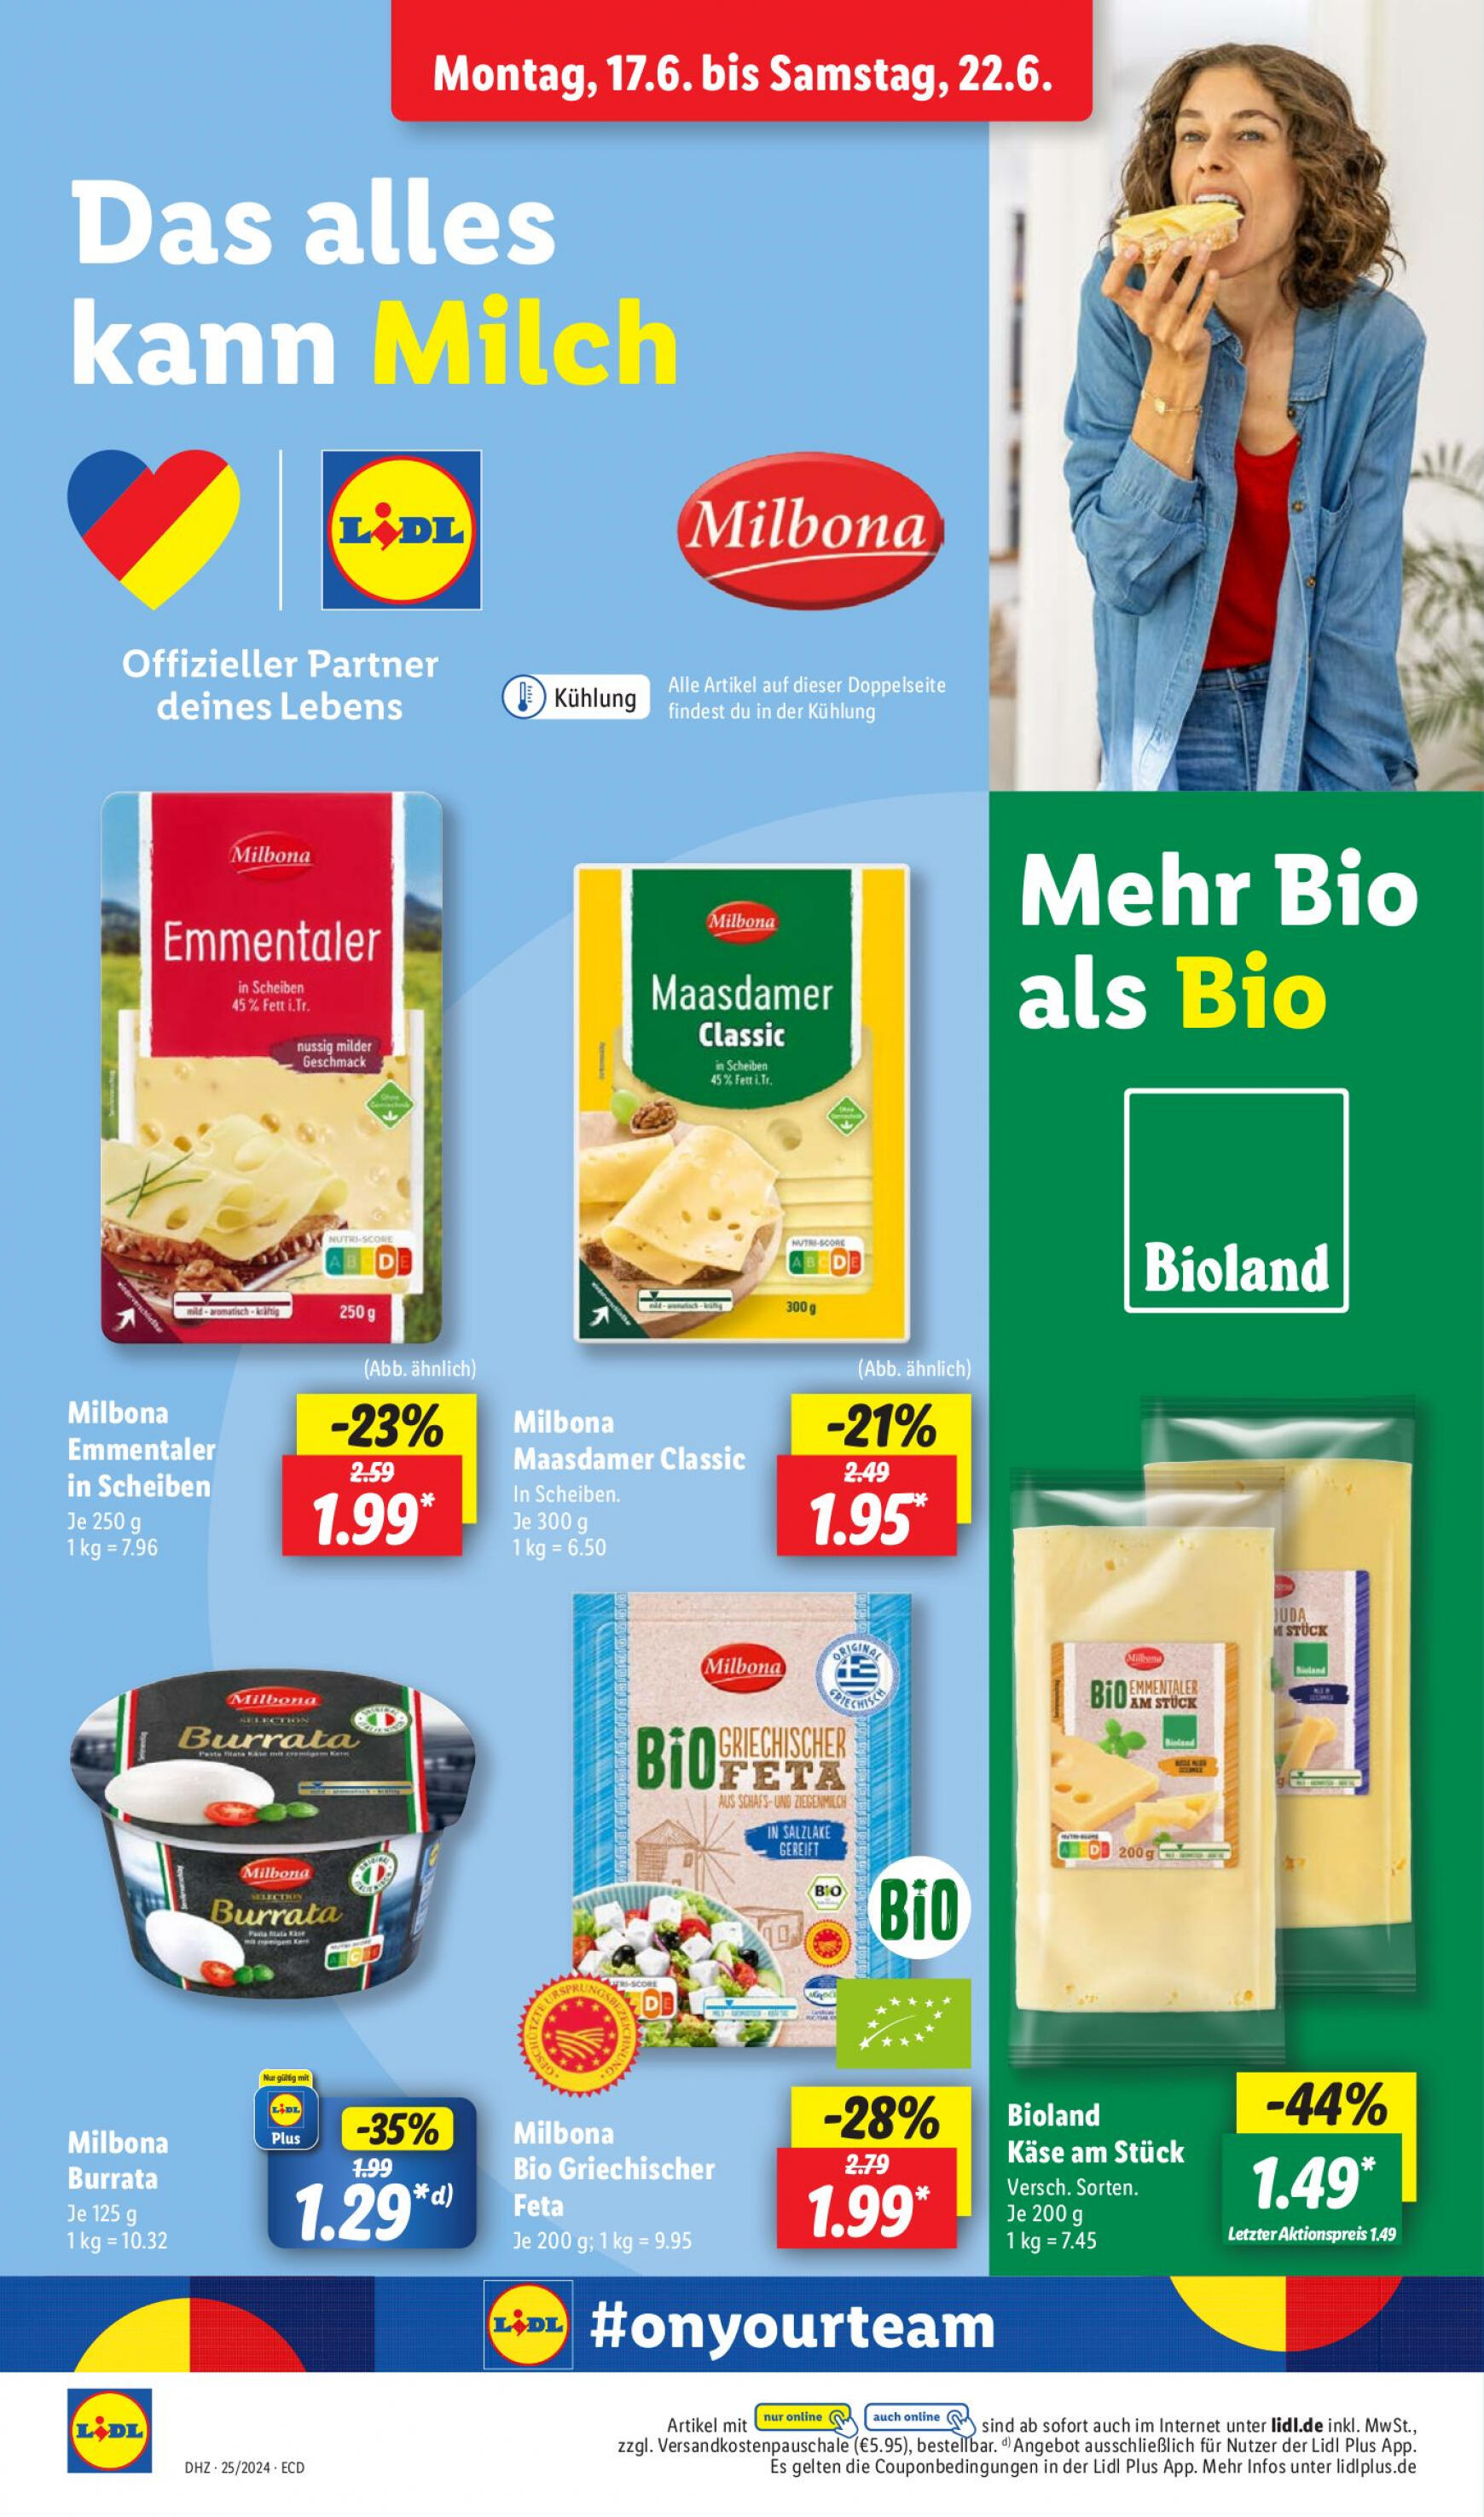 lidl - Flyer Lidl aktuell 17.06. - 22.06. - page: 8